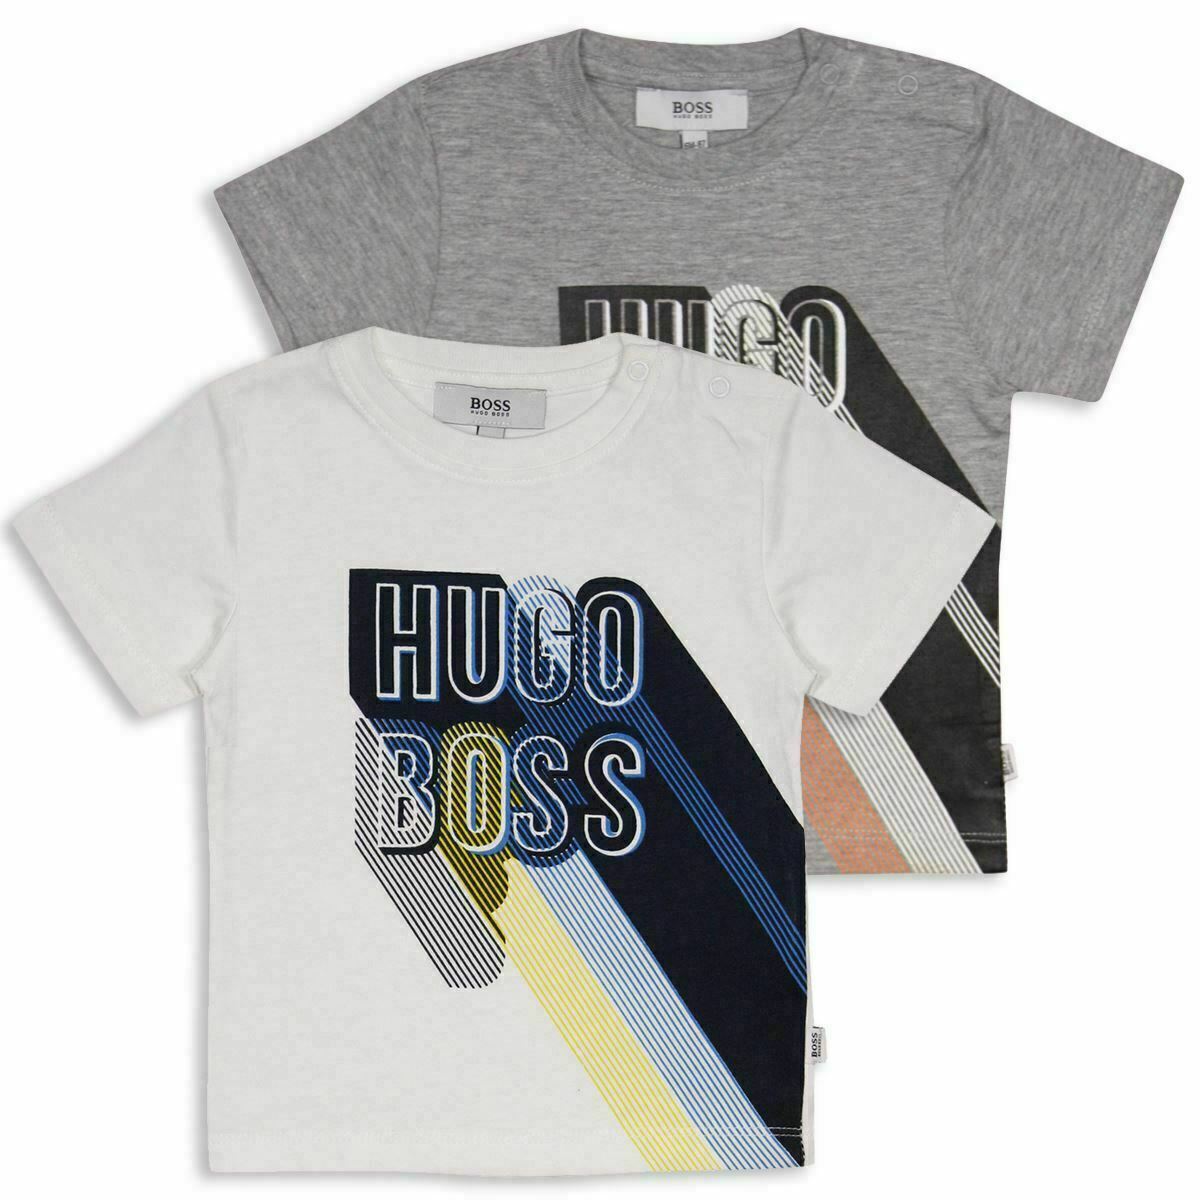 Primary image for Hugo Boss Kid's Long Shadow Text S/S T-Shirt (S09)